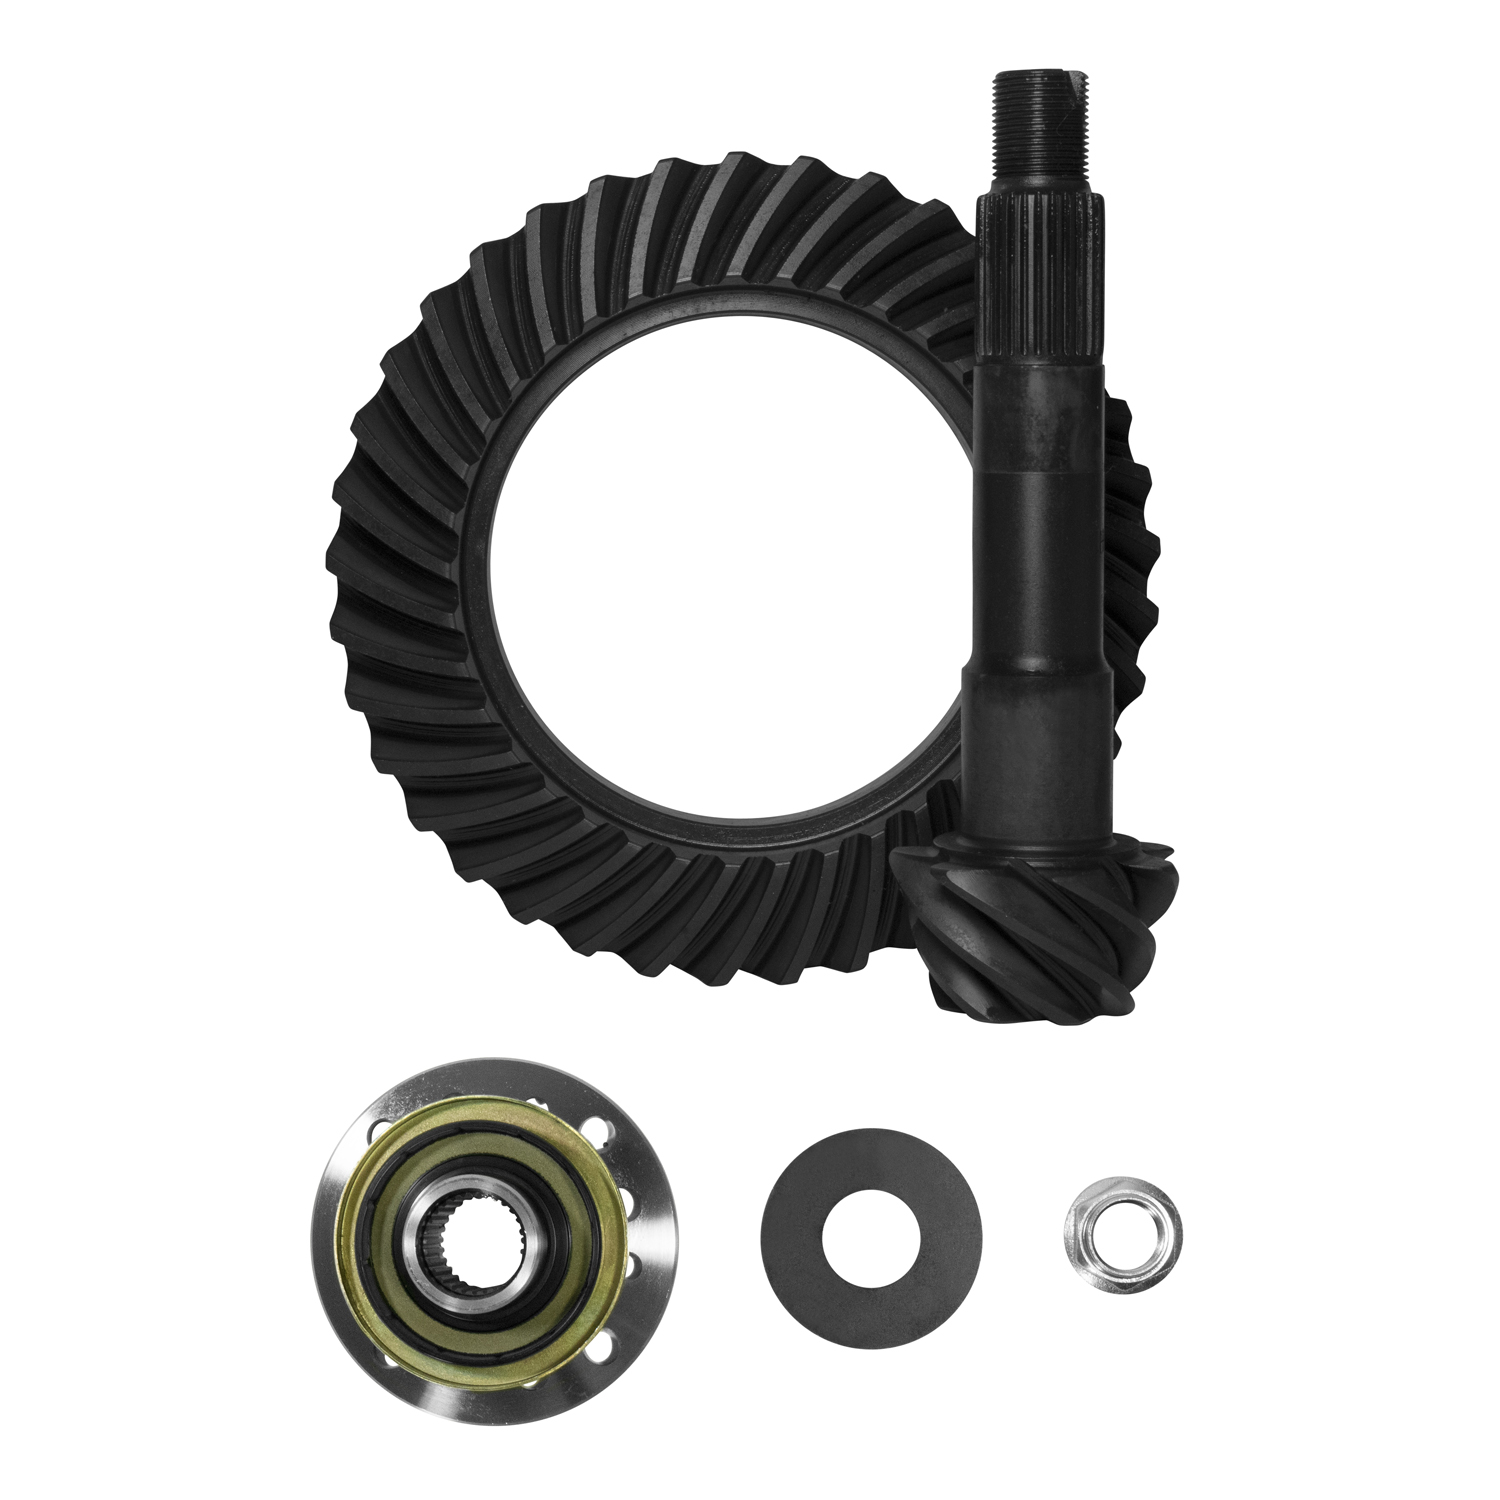 High performance Yukon Ring & Pinion gear set for Toyota 8" in a 4.56 ratio 